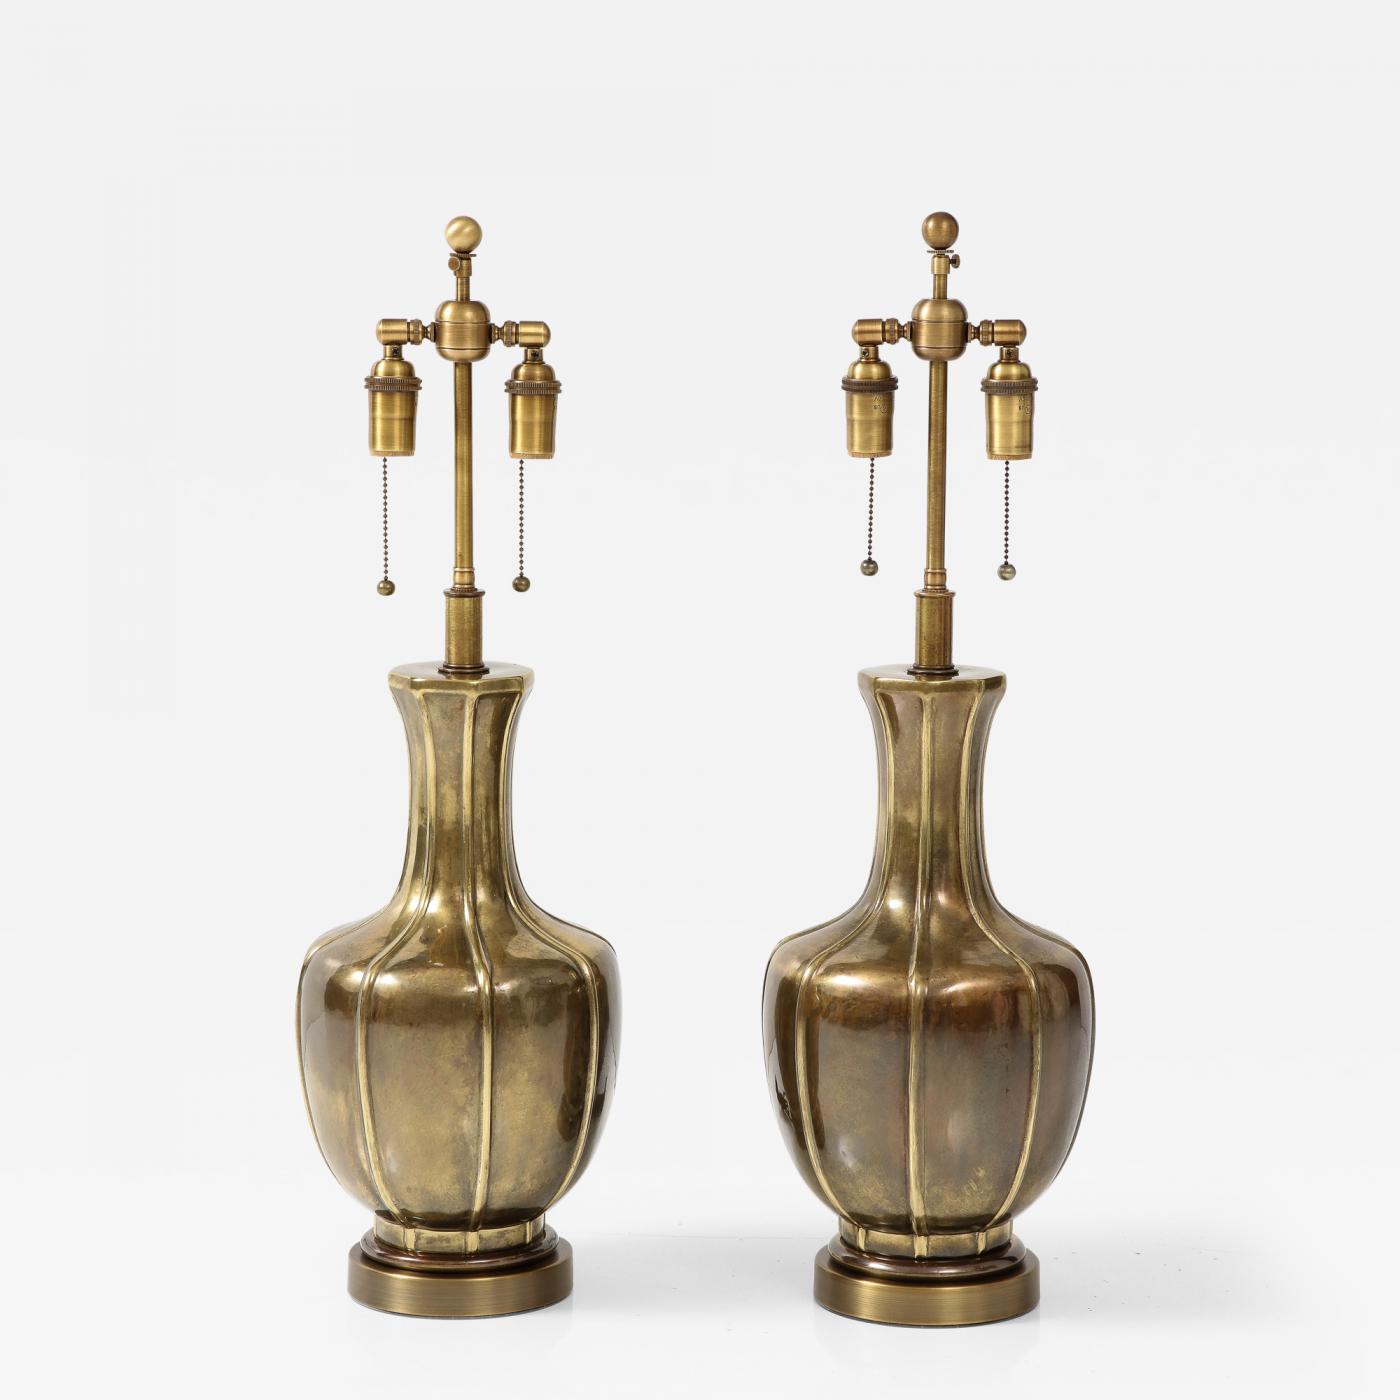 https://cdn.incollect.com/sites/default/files/zoom/Frederick-Cooper-Lamp-Co-Pair-of-Mid-Century-Antique-Brass-Lamps-by-Frederick-Cooper-651347-3161275.jpg